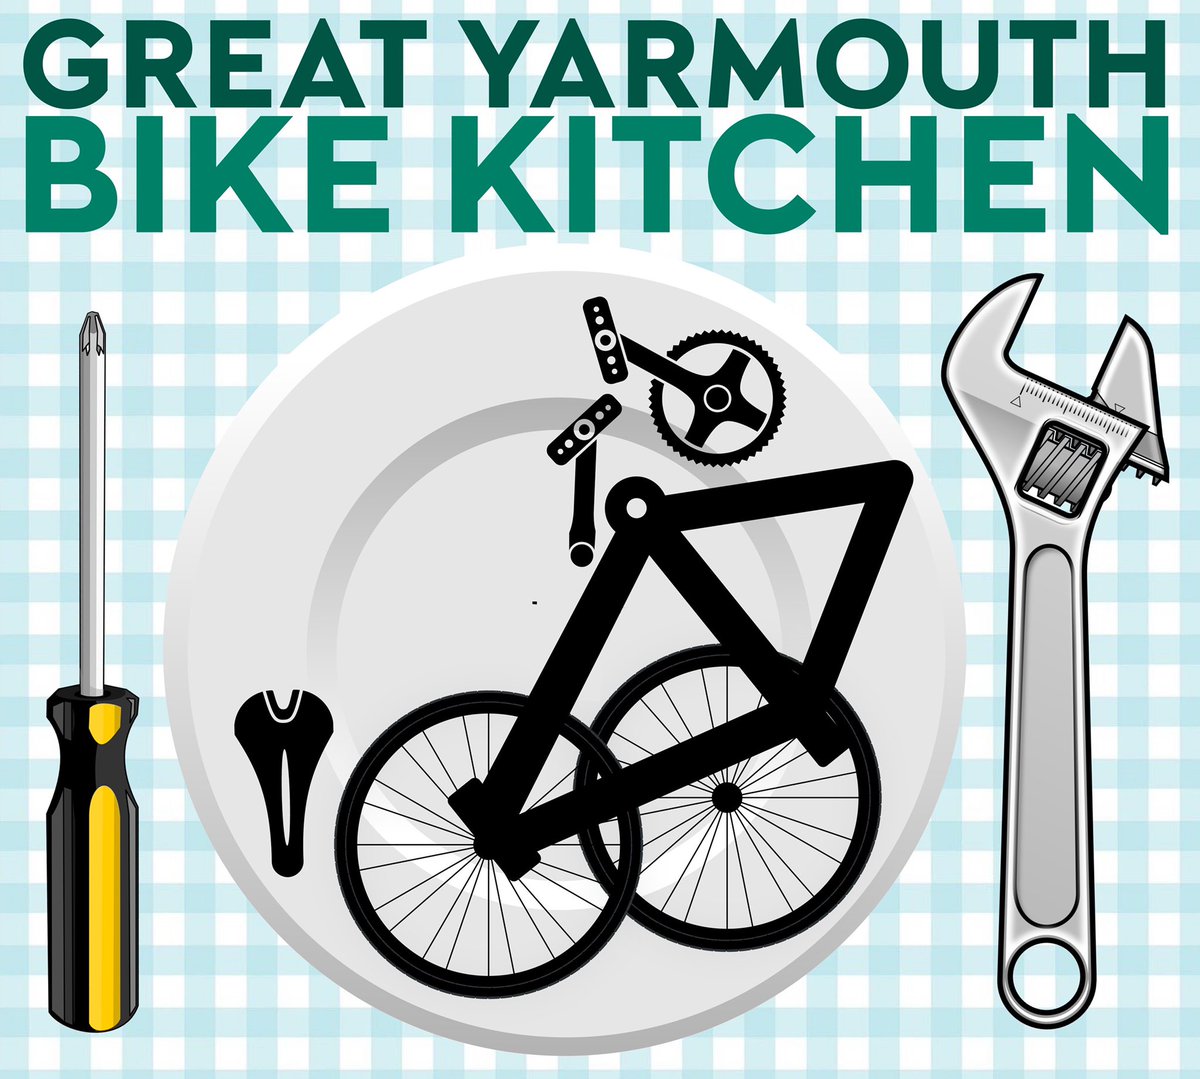 Great Yarmouth Bike Kitchen is back in its new monthly slot of the first Tuesday of the month 🚲🧡🌍

Get access to tools and support to fix your own bike from 5.30-7.30pm on Tues 6th Sept at the Wastesmiths workshop on Estcourt Rd, North Yarmouth… first come first served